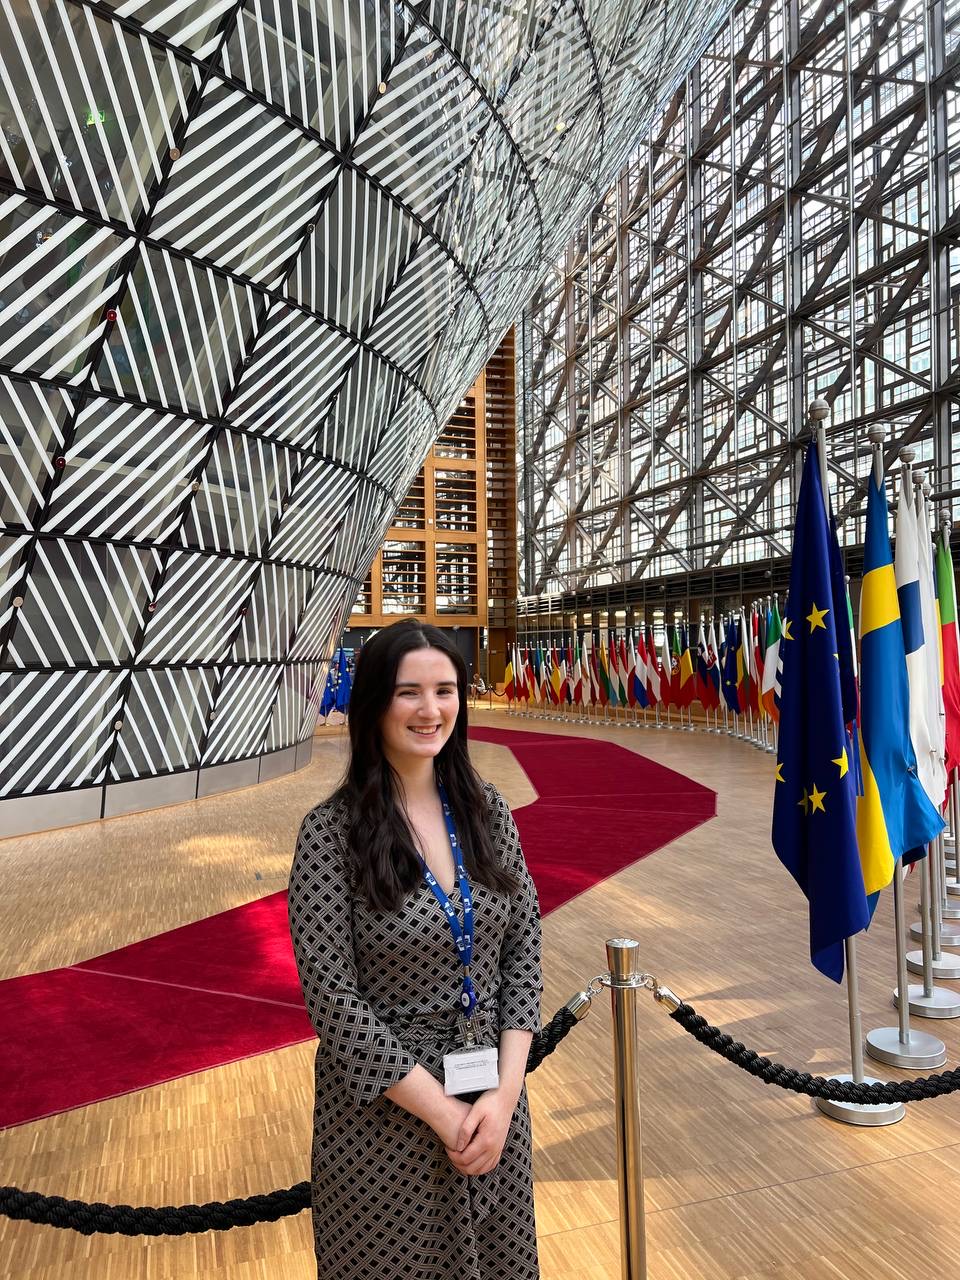 Woman with long dark hair standing in front of the large steel-structured internal facade of an office building. The corridor is lined with European flags.